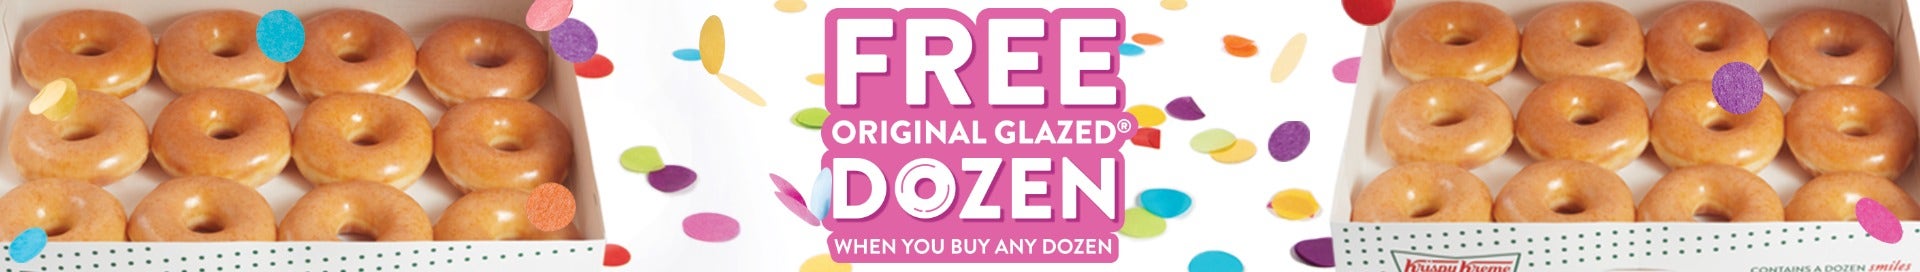 Krispy Kreme May Sale - Get a Free Original Glazed Dozen when you buy any dozen in store 19th May - extended online 20th may